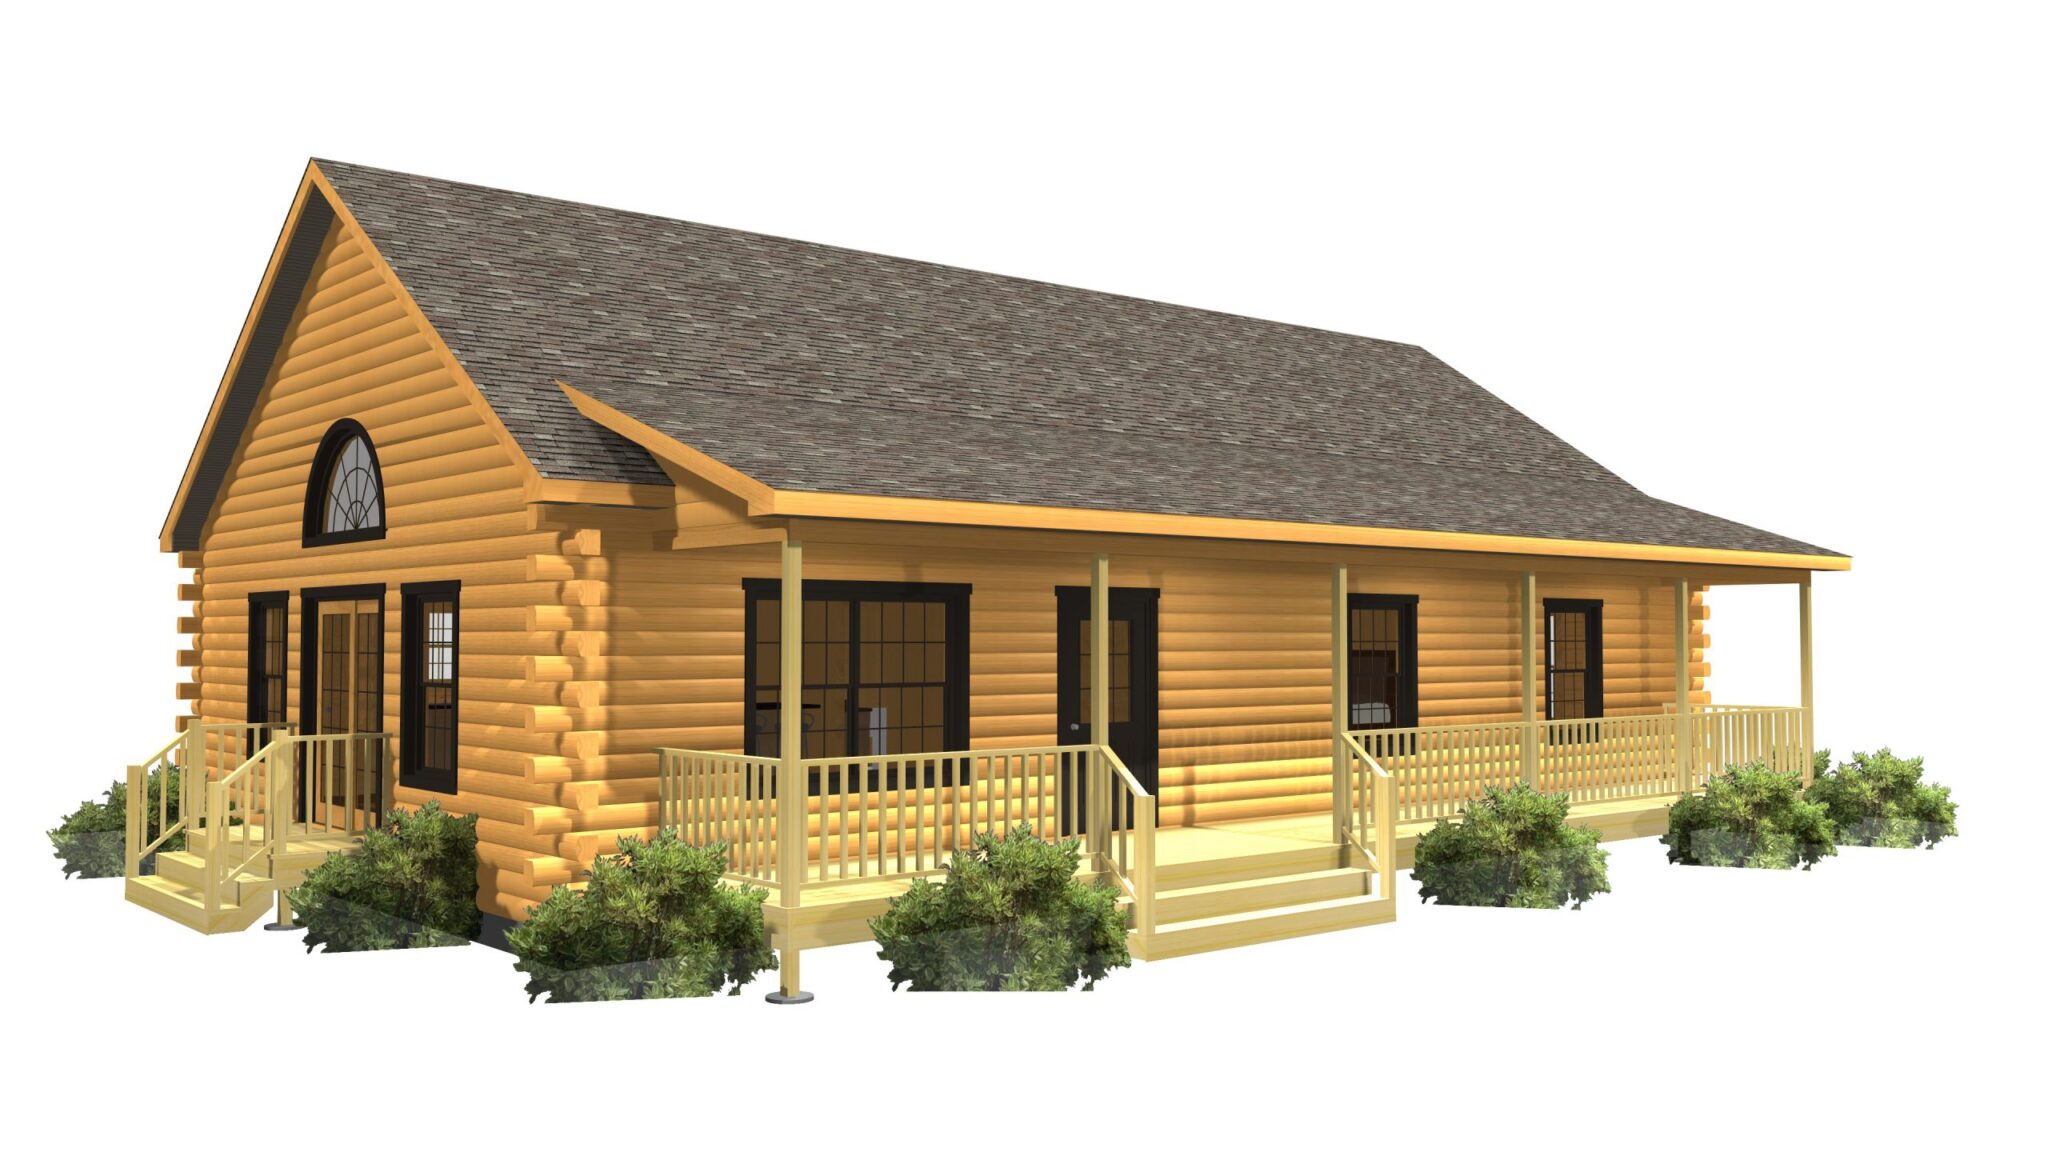 Log Home Series Building Packages